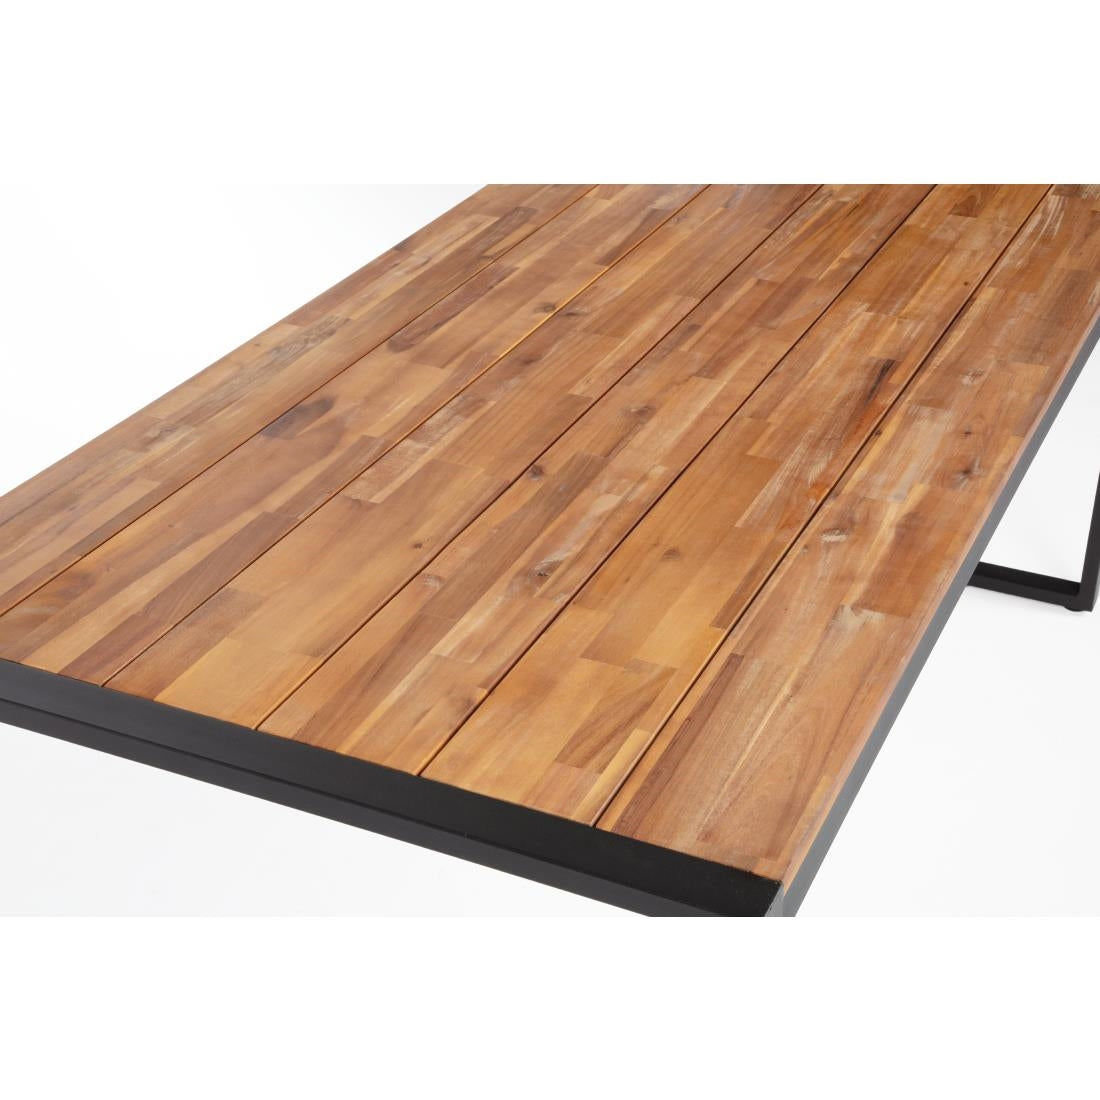 Bolero Acacia Wood and Steel Rectangular Industrial Table 1800mm JD Catering Equipment Solutions Ltd